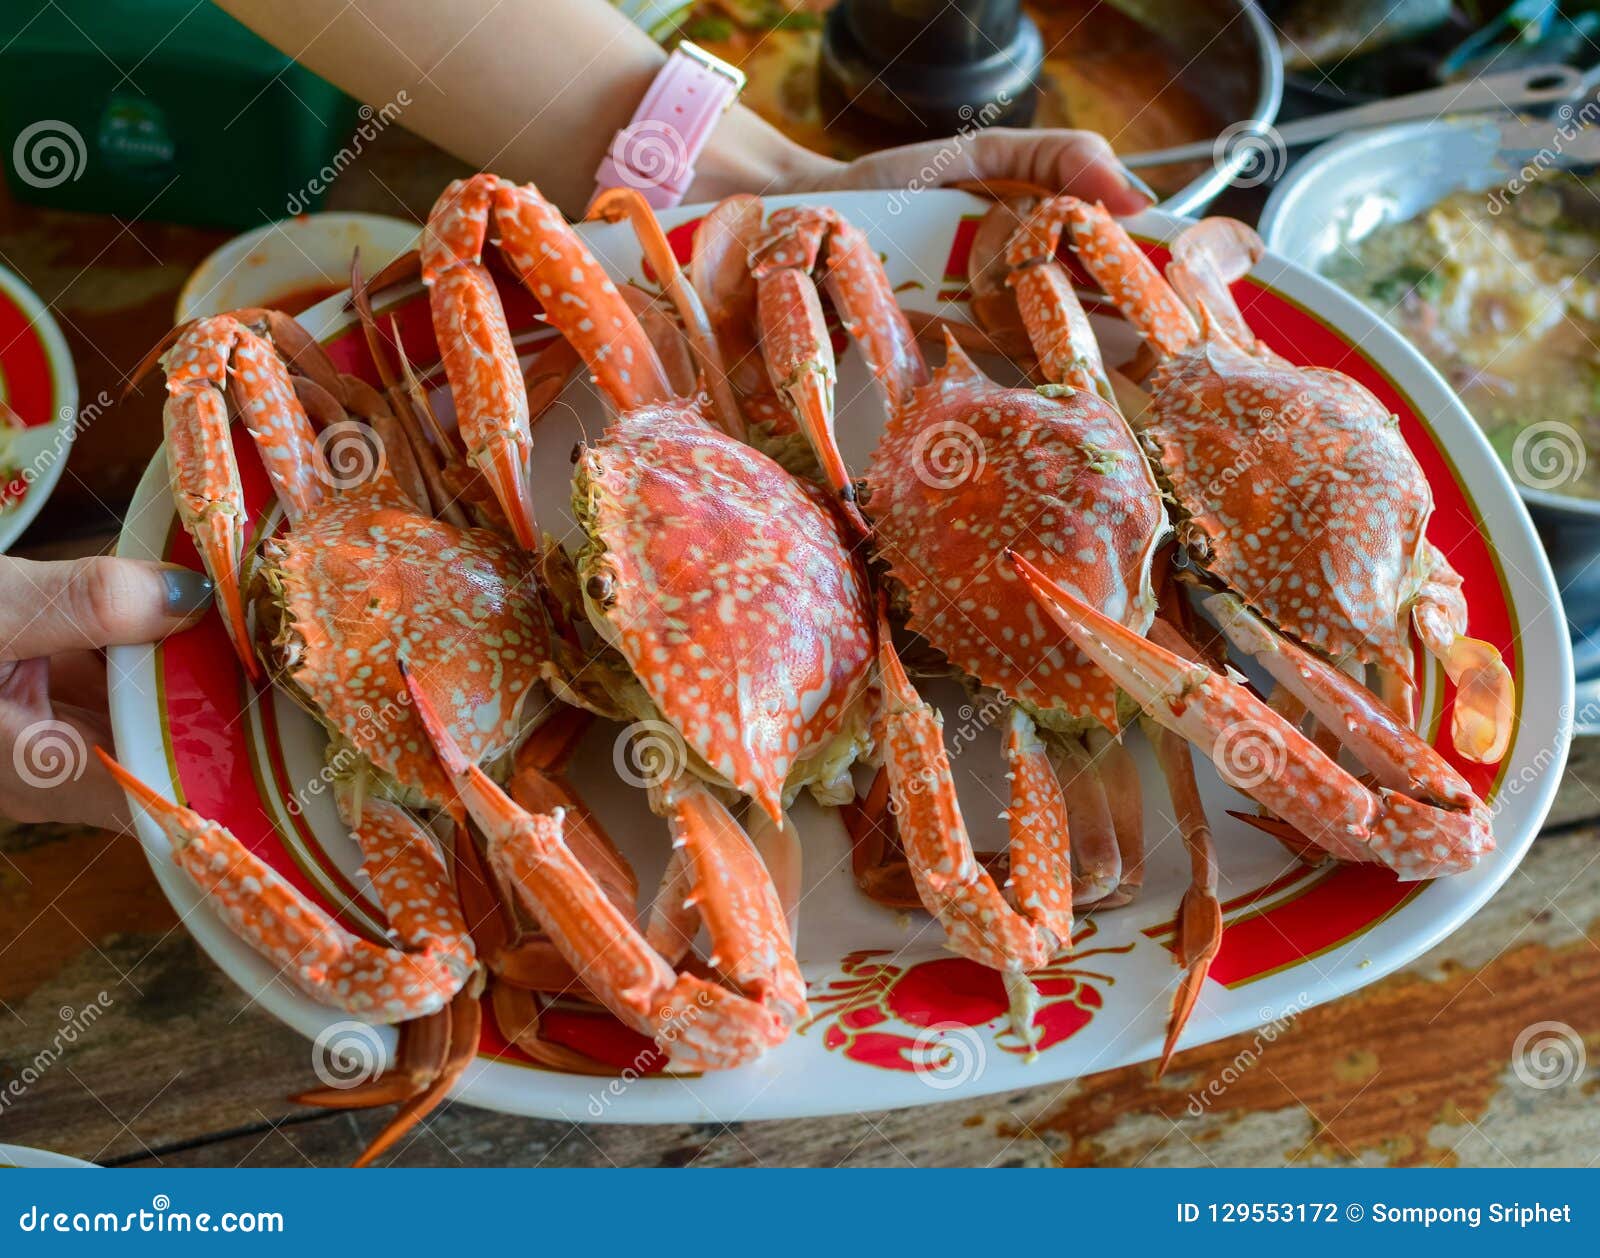 Sea Crab Steam Seafood Placed On A Table Stock Photo ...